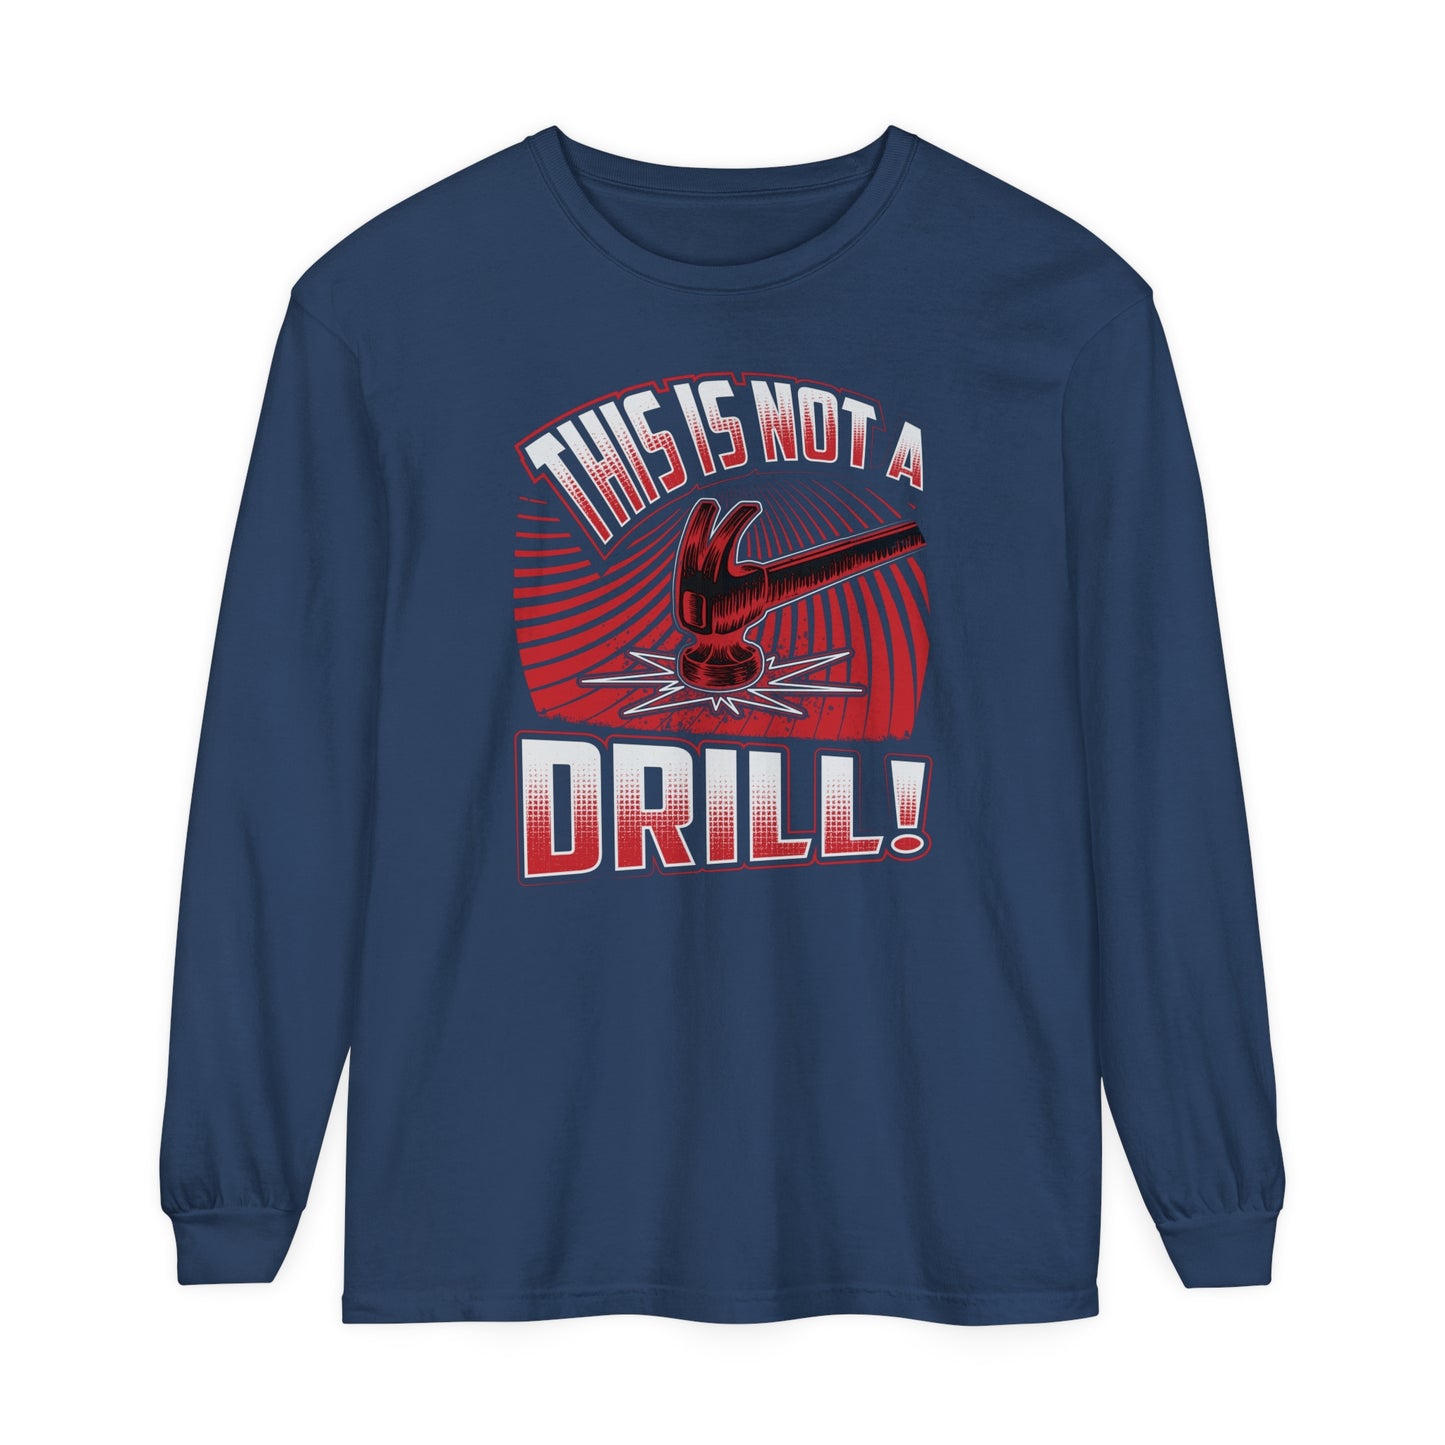 Not A Drill Long Sleeve